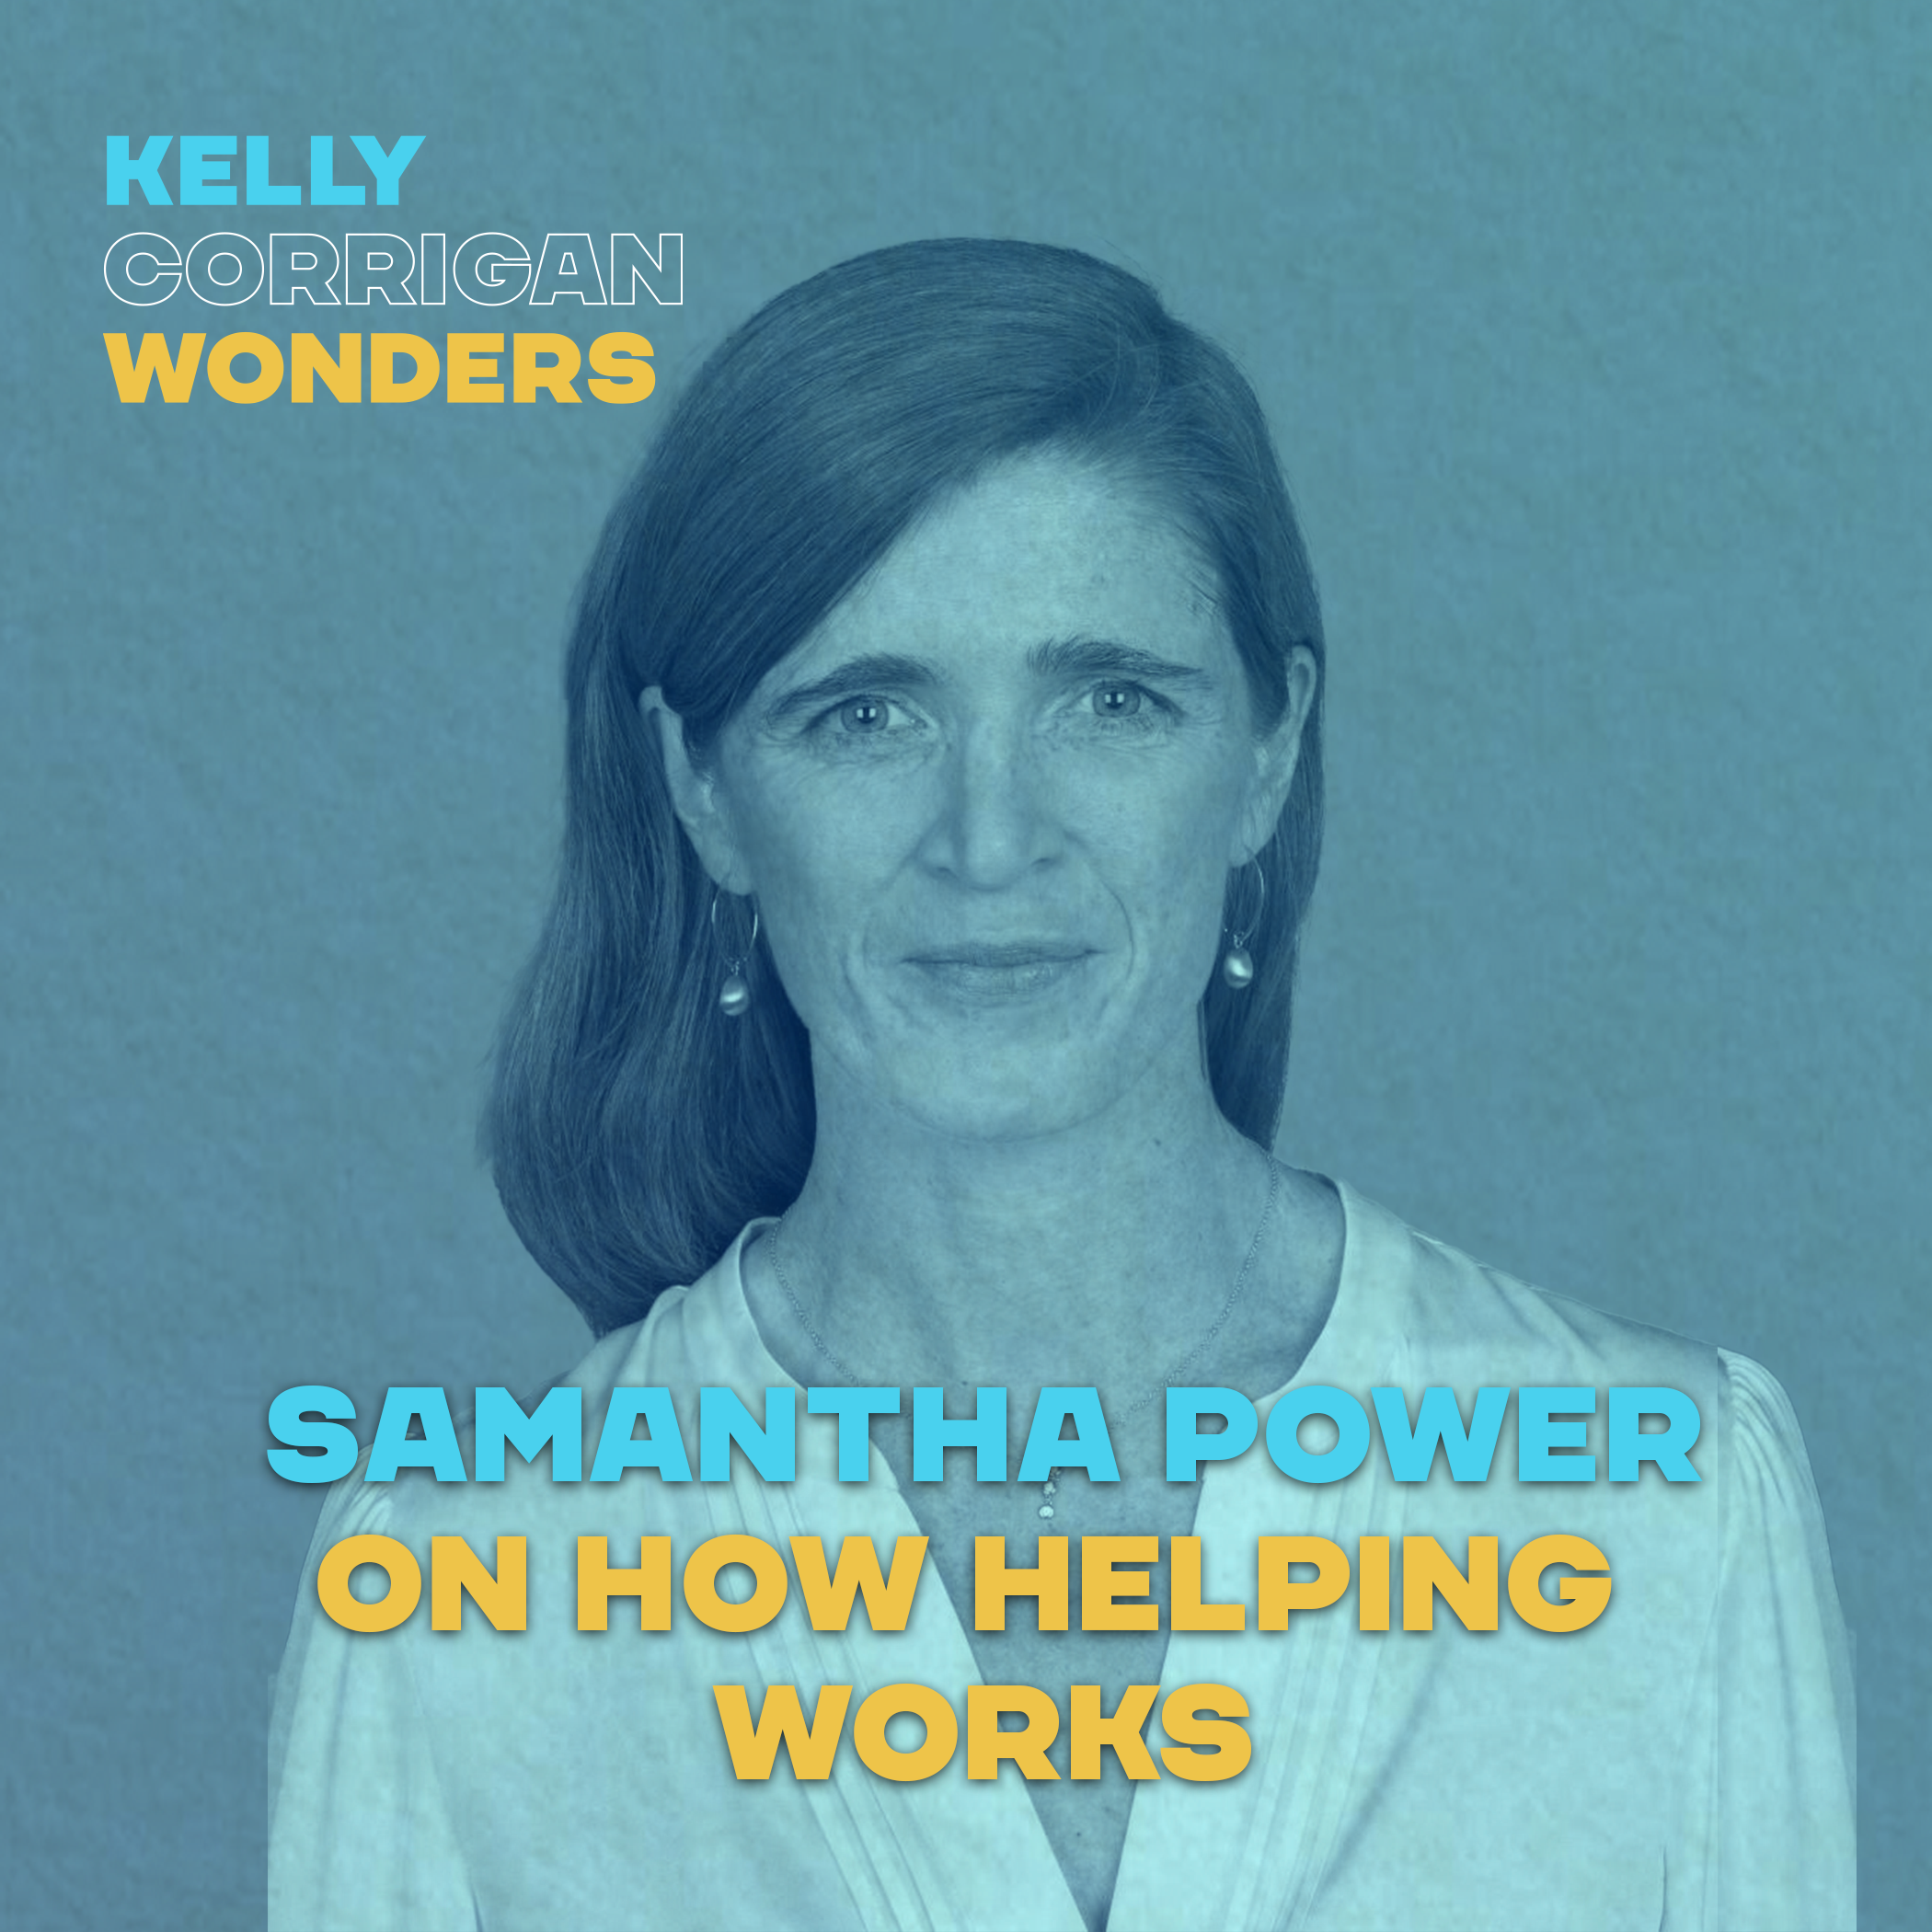 How Helping Works with Samantha Power